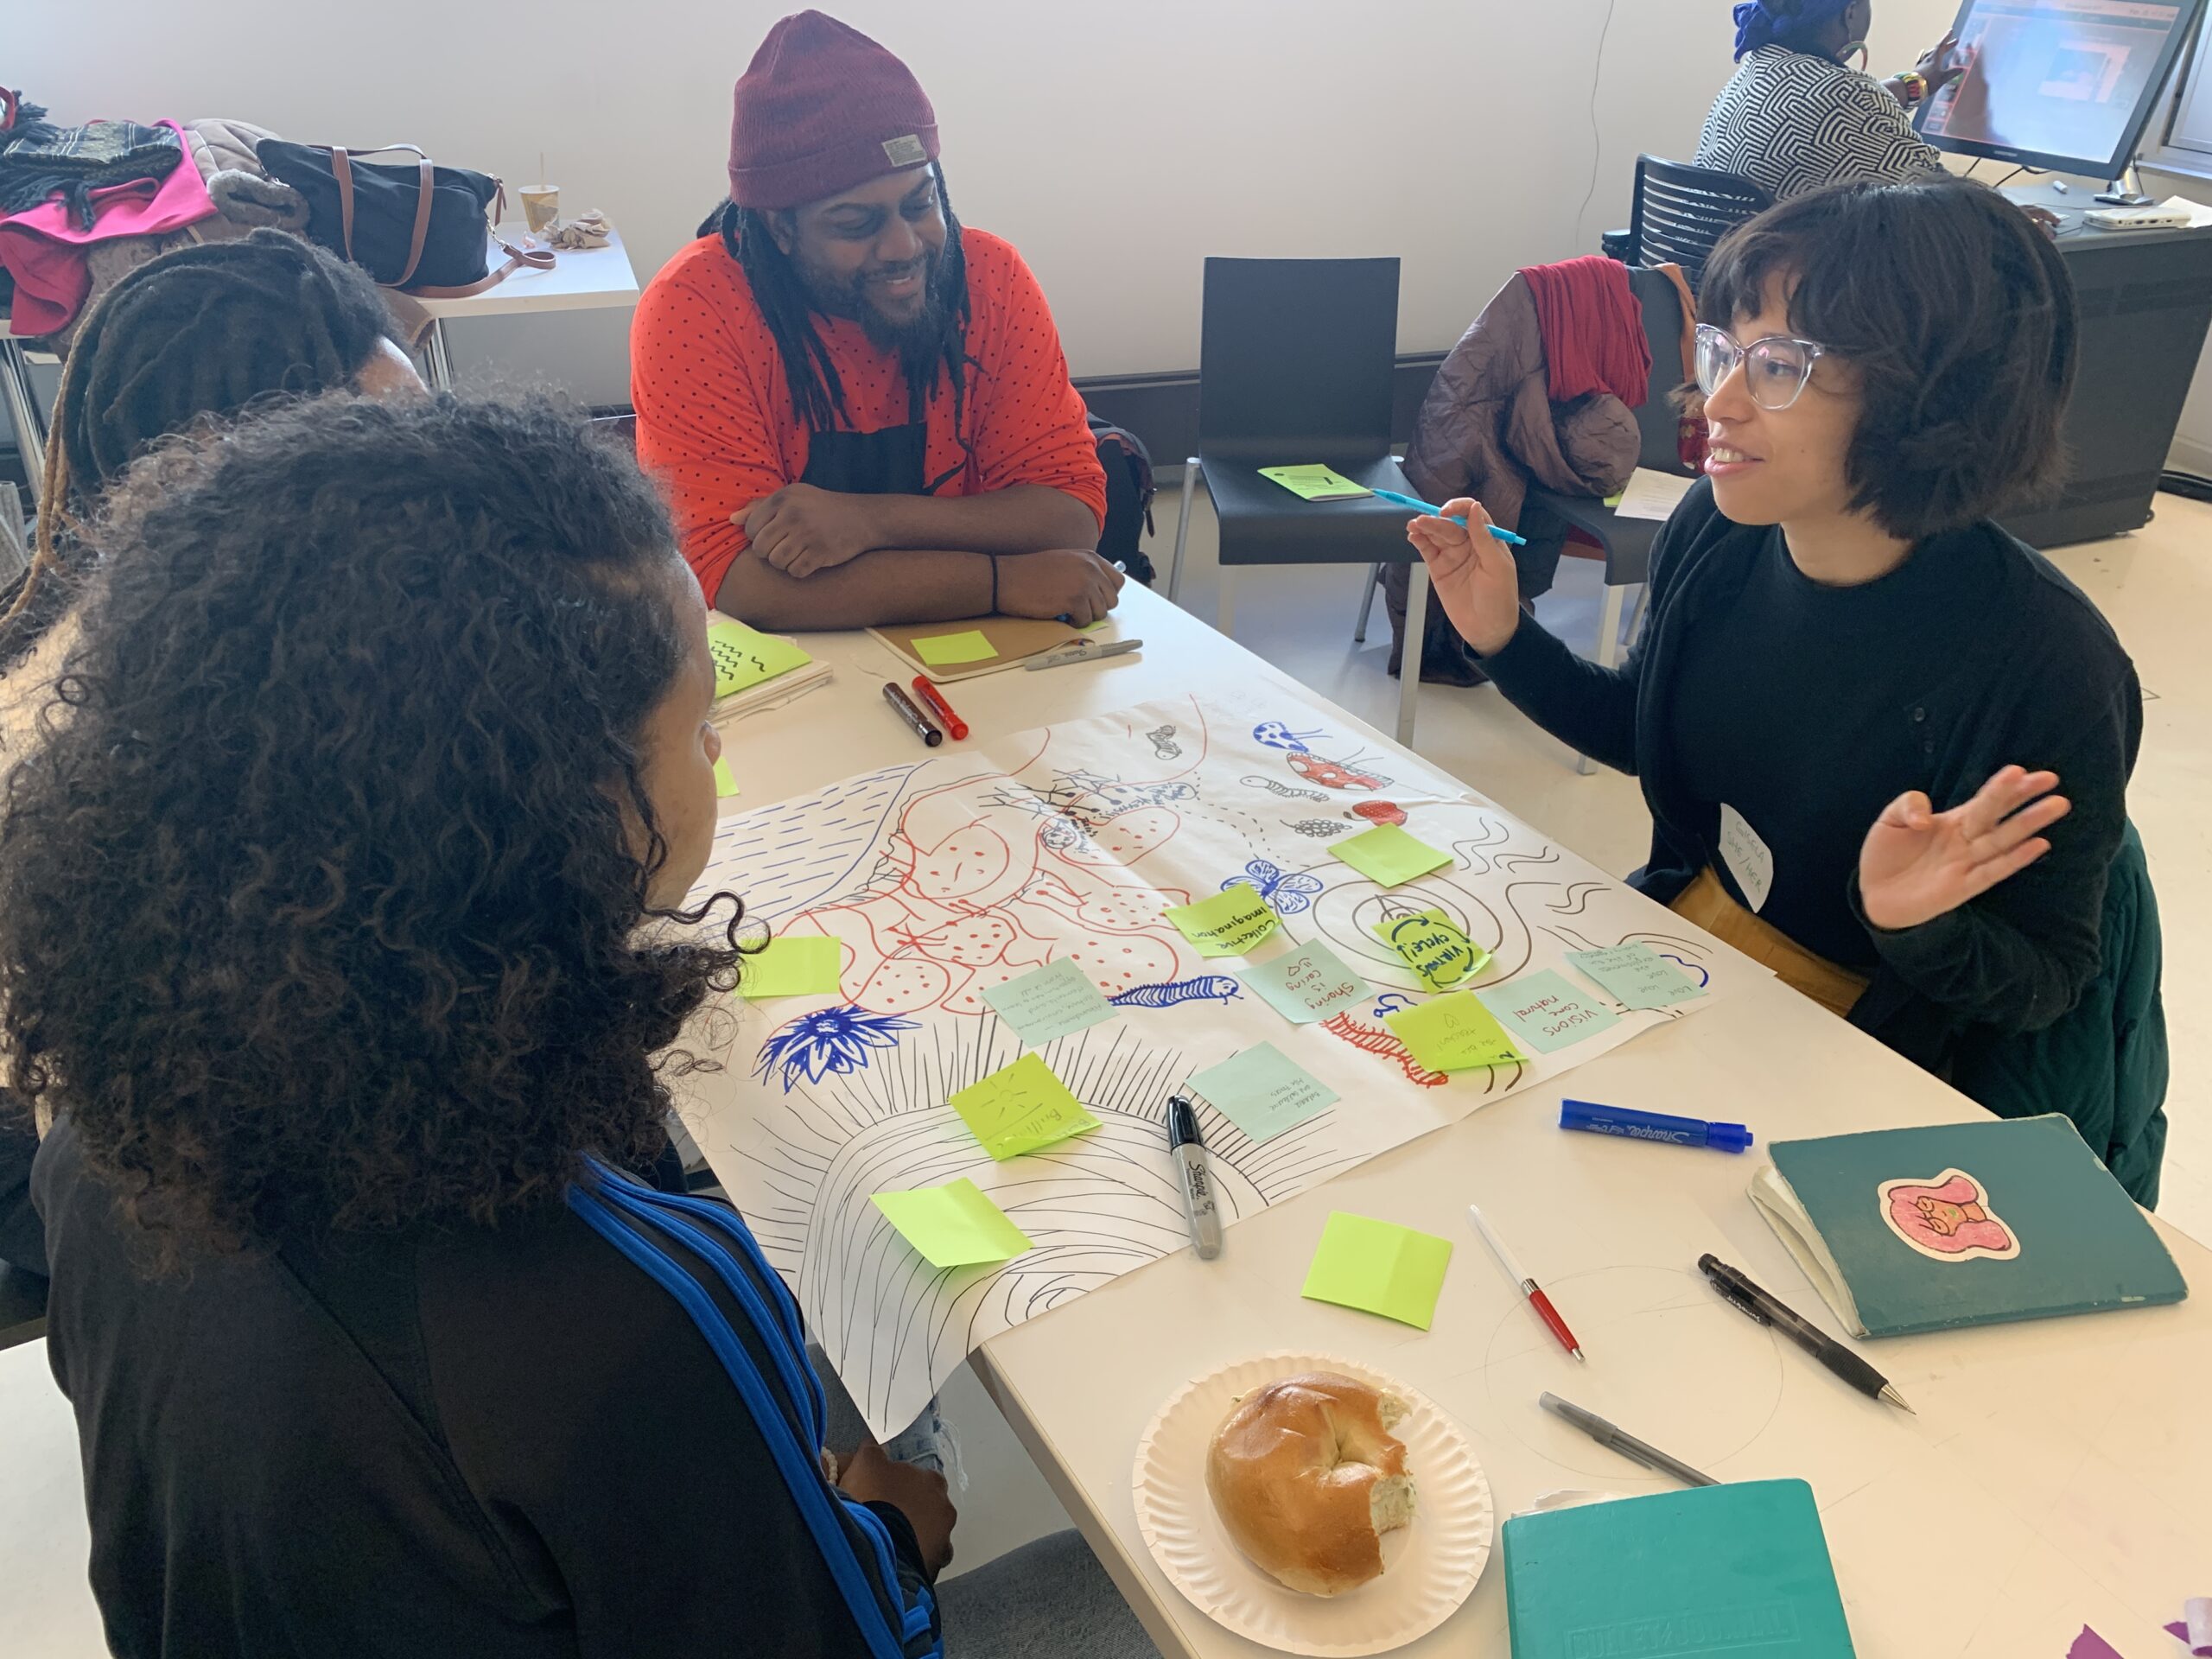 People gathered around the table, working together at our 2020 Cultural Organizing/mapping workshop.